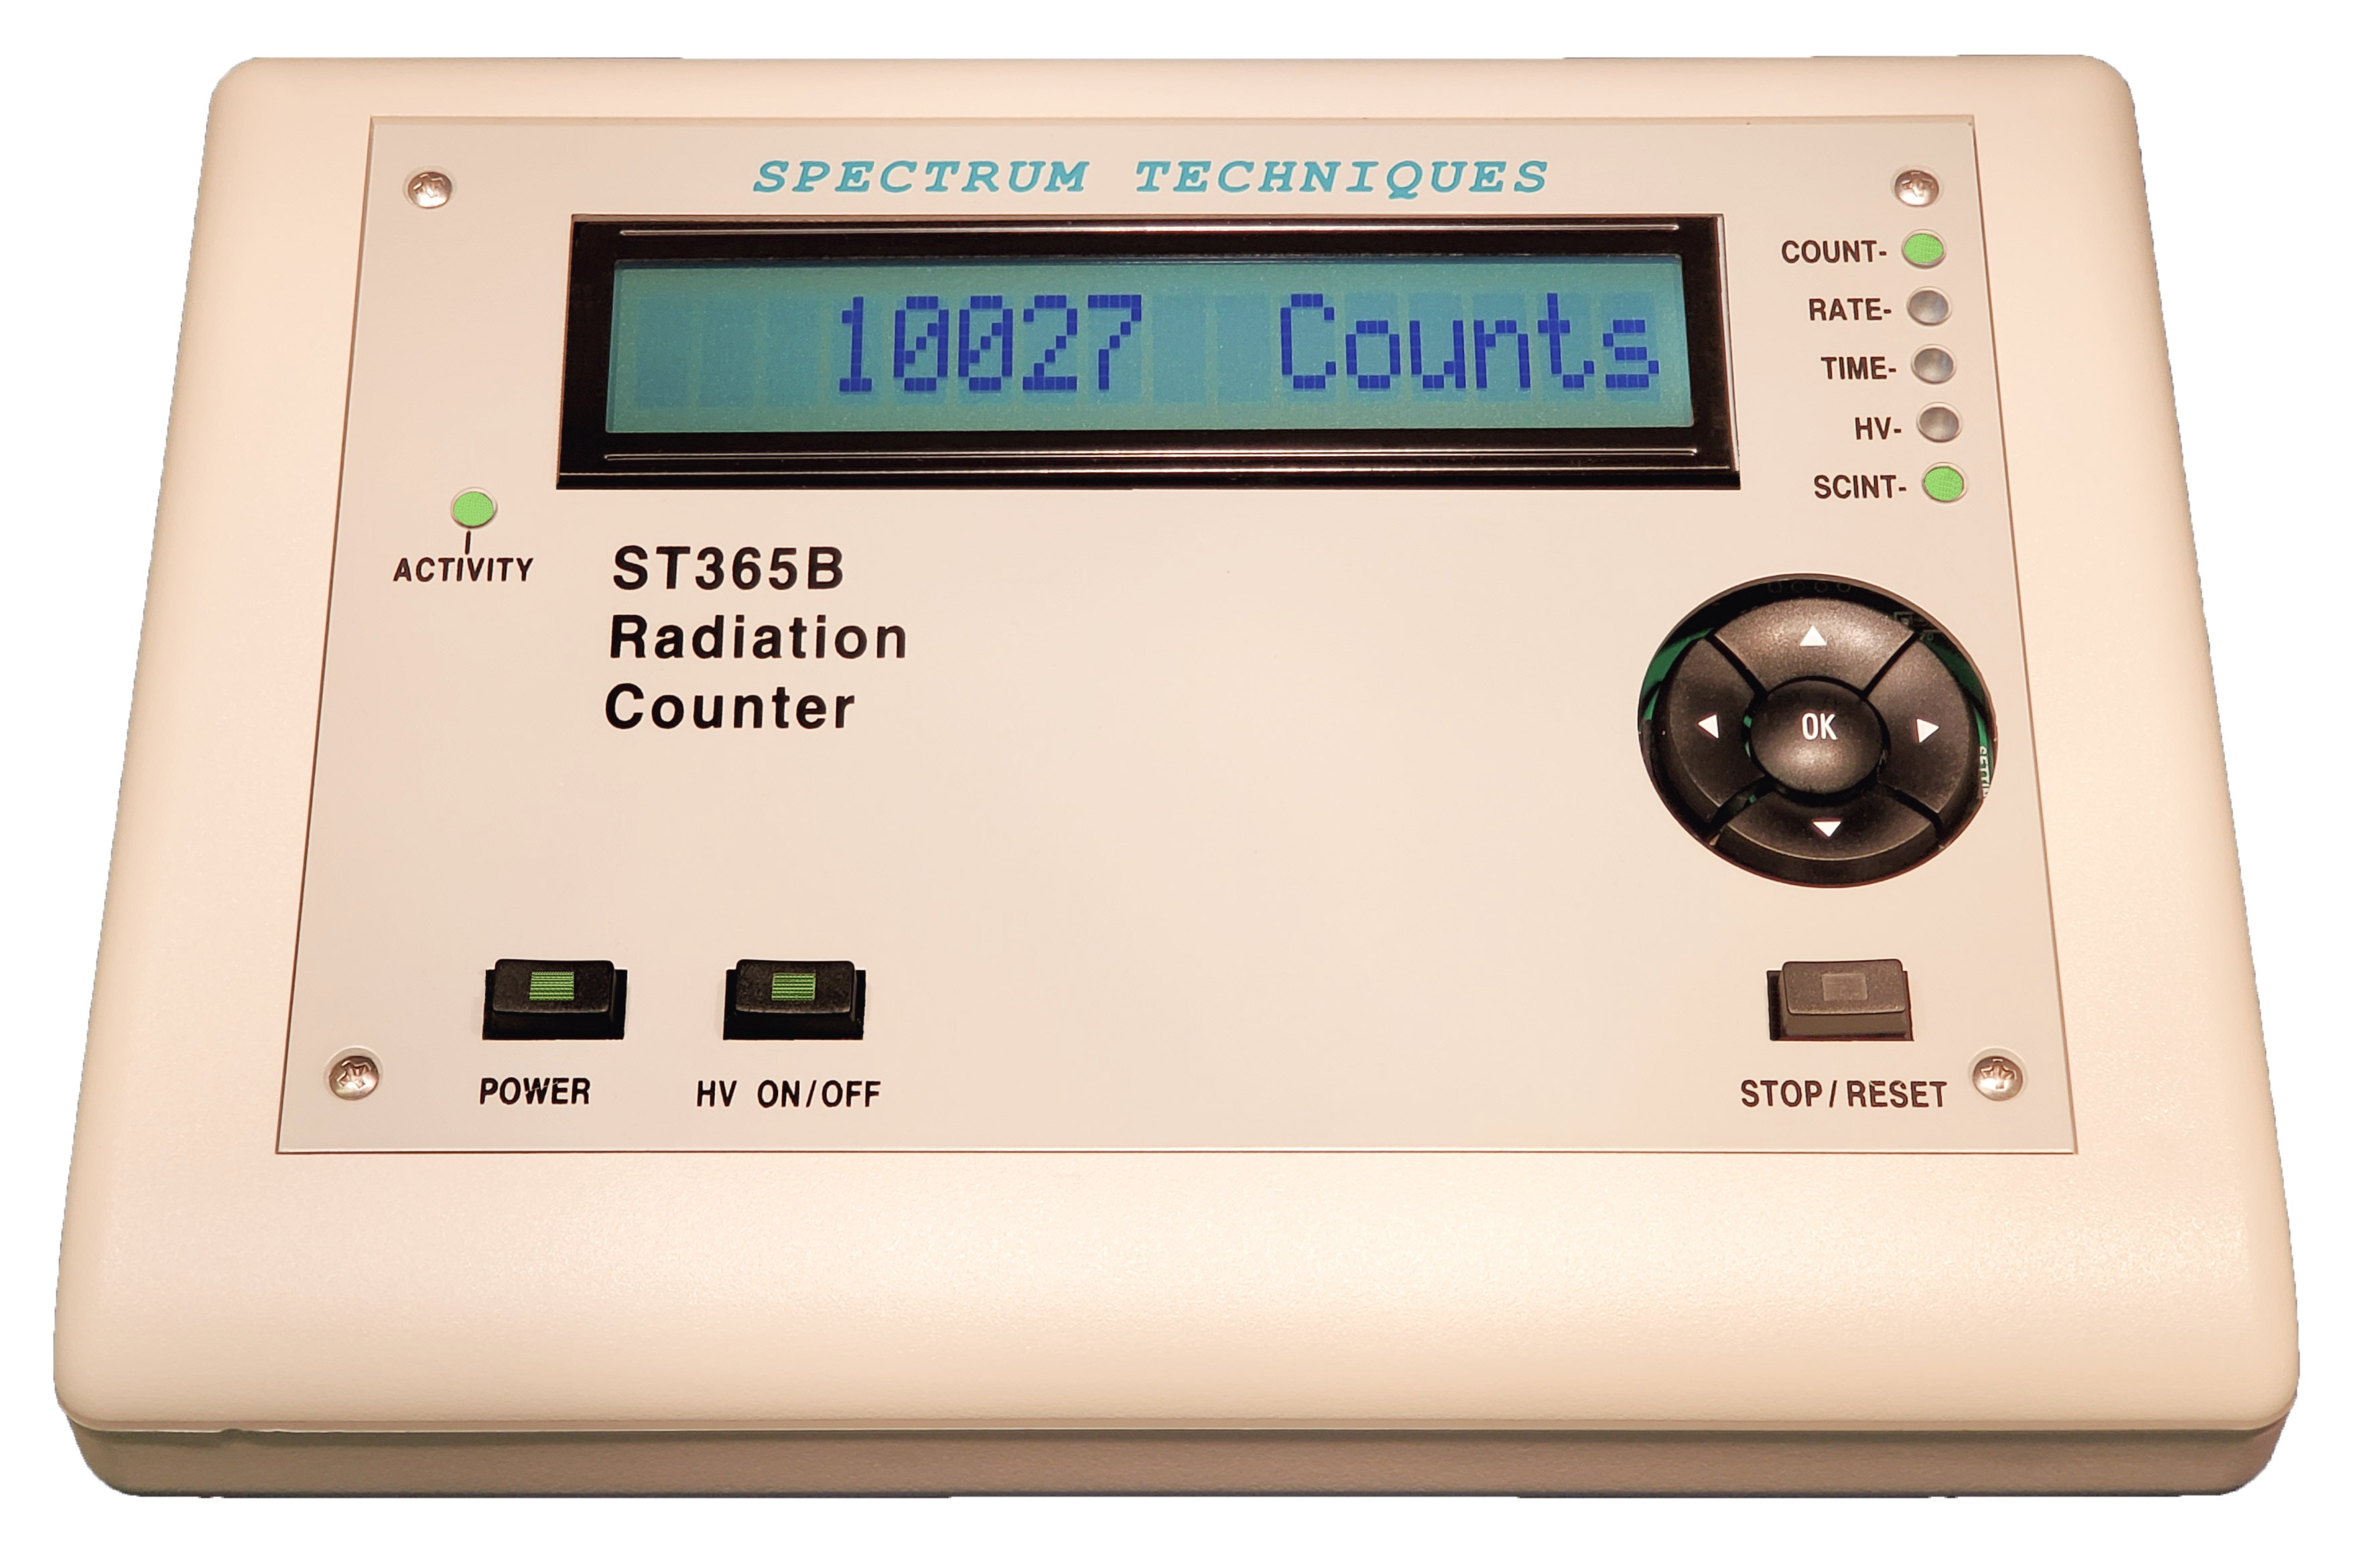 ST365B wireless radiation counter by spectrum techniques